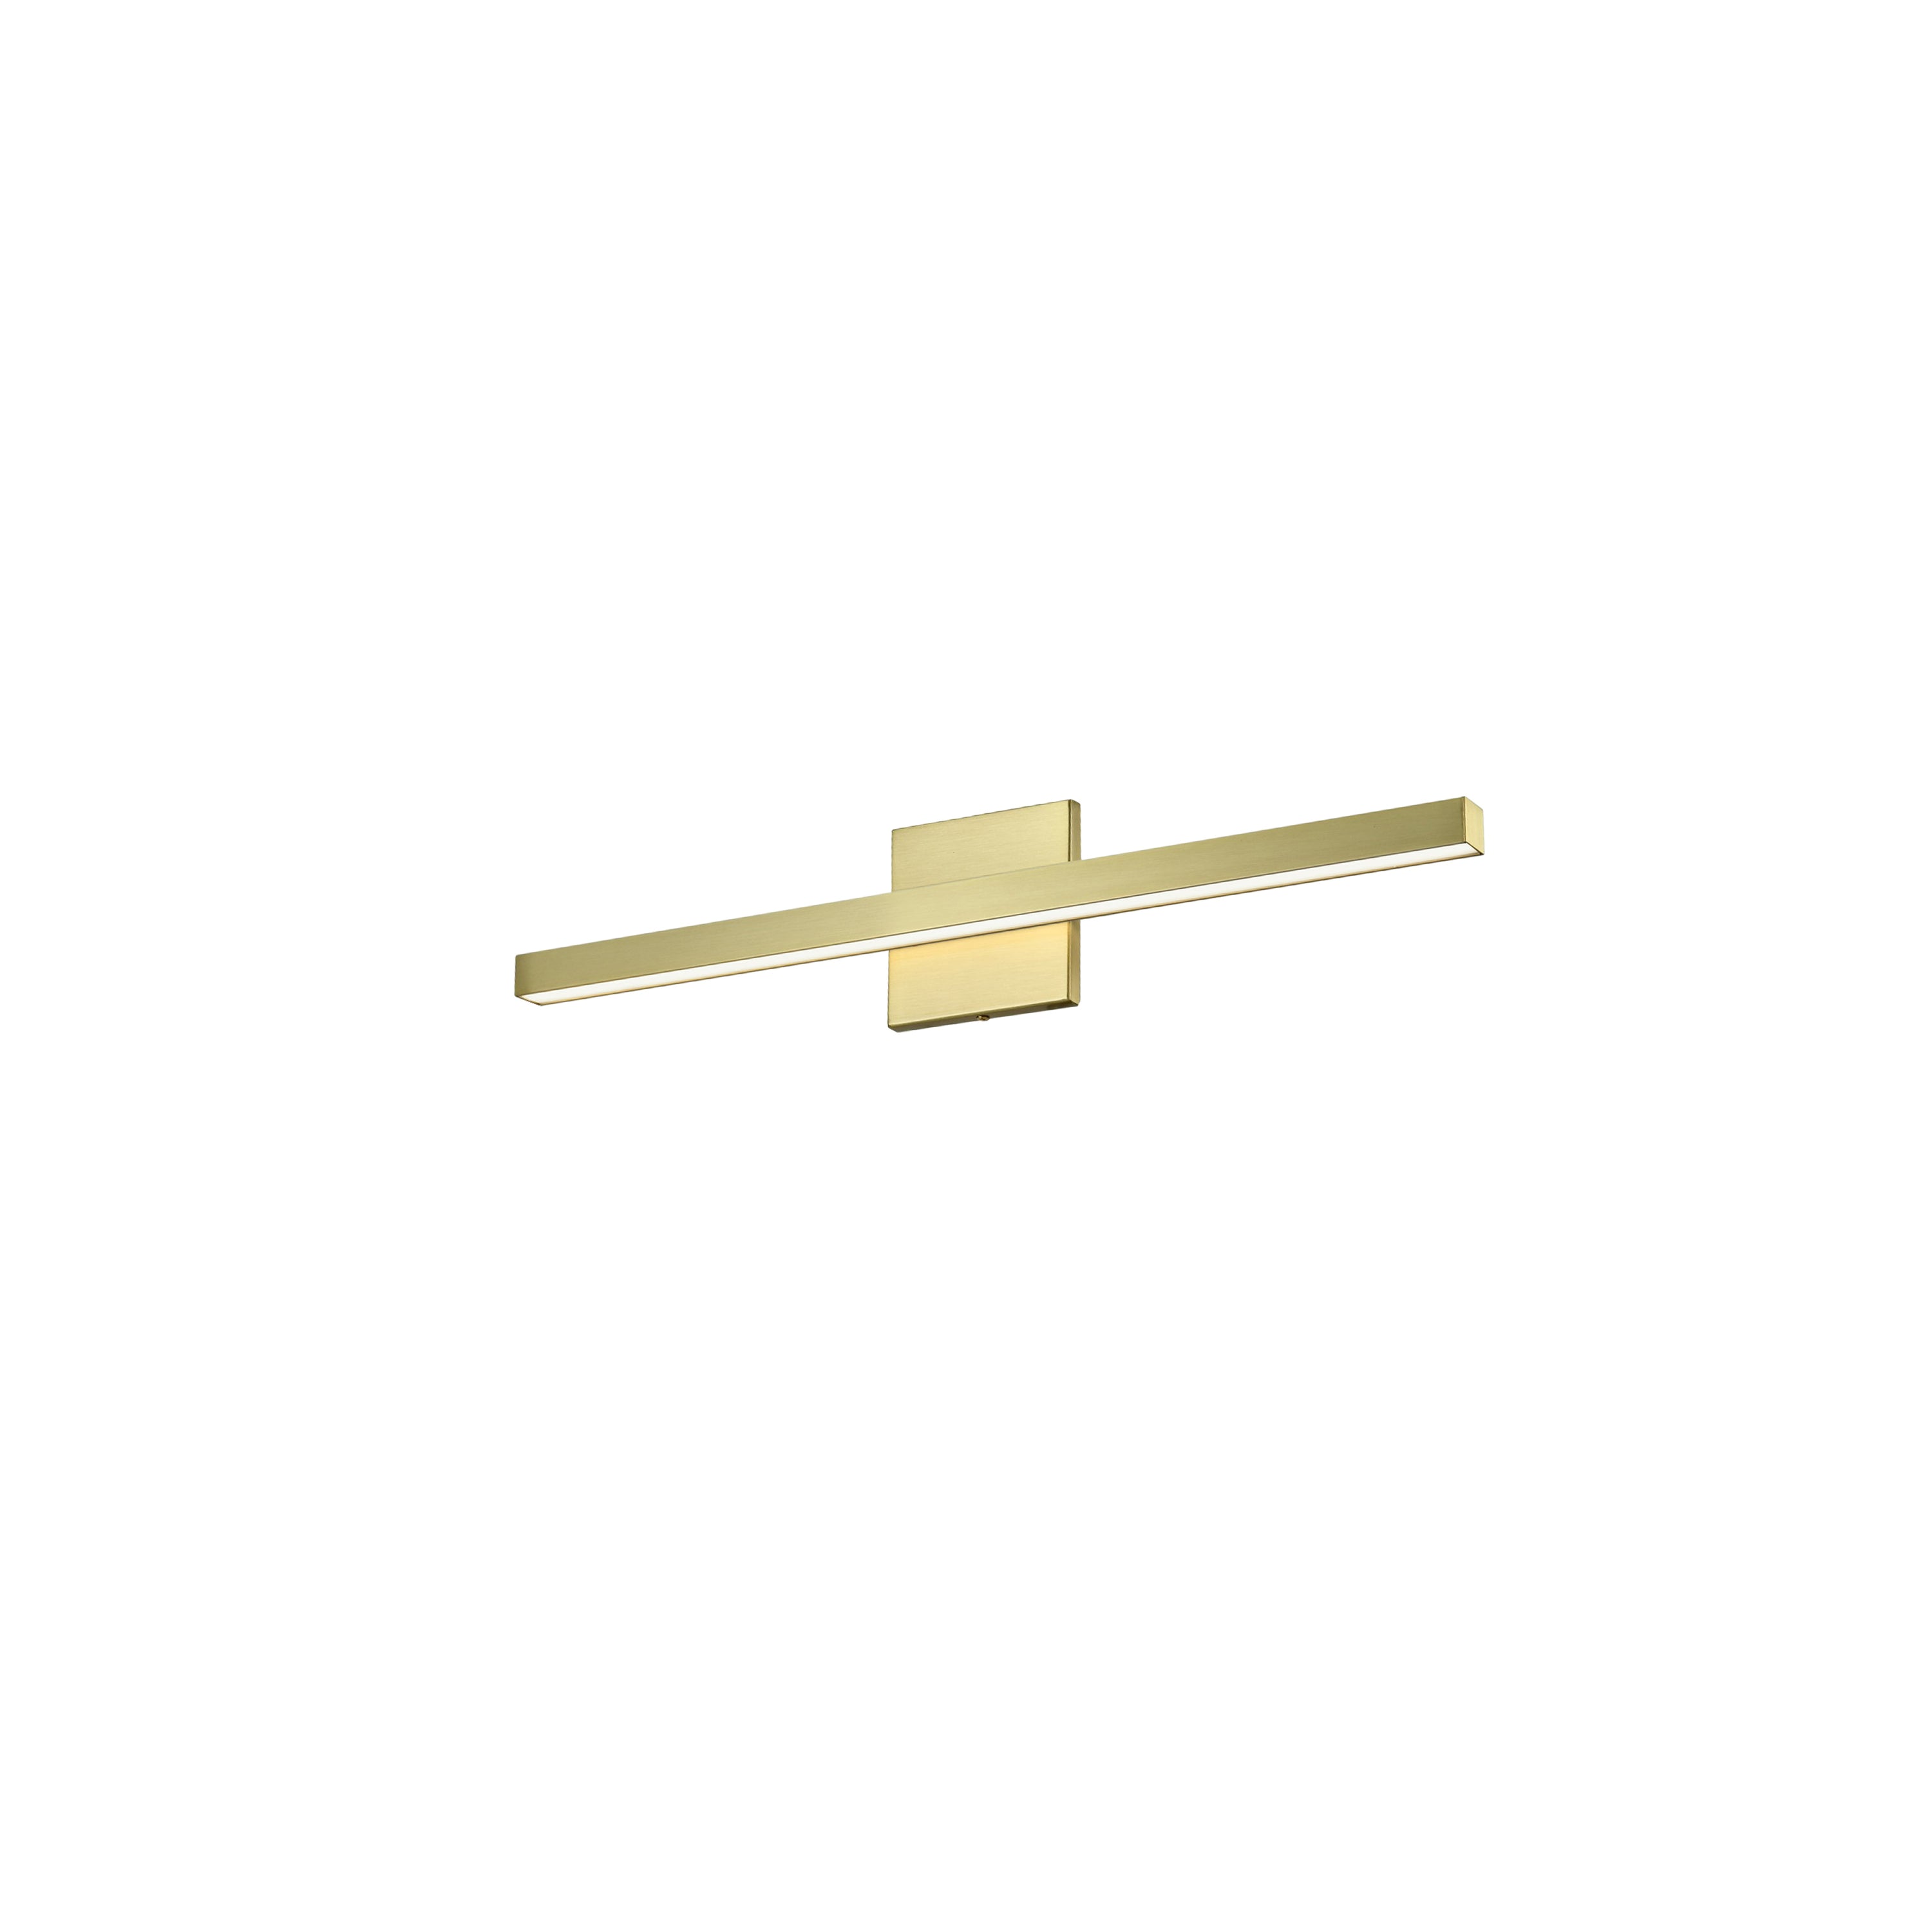 Dainolite Arandel - ARL-2518LEDW-AGB - 18W Vanity Fixture, Aged Brass with Frosted Acrylic Diffuser - Aged Brass